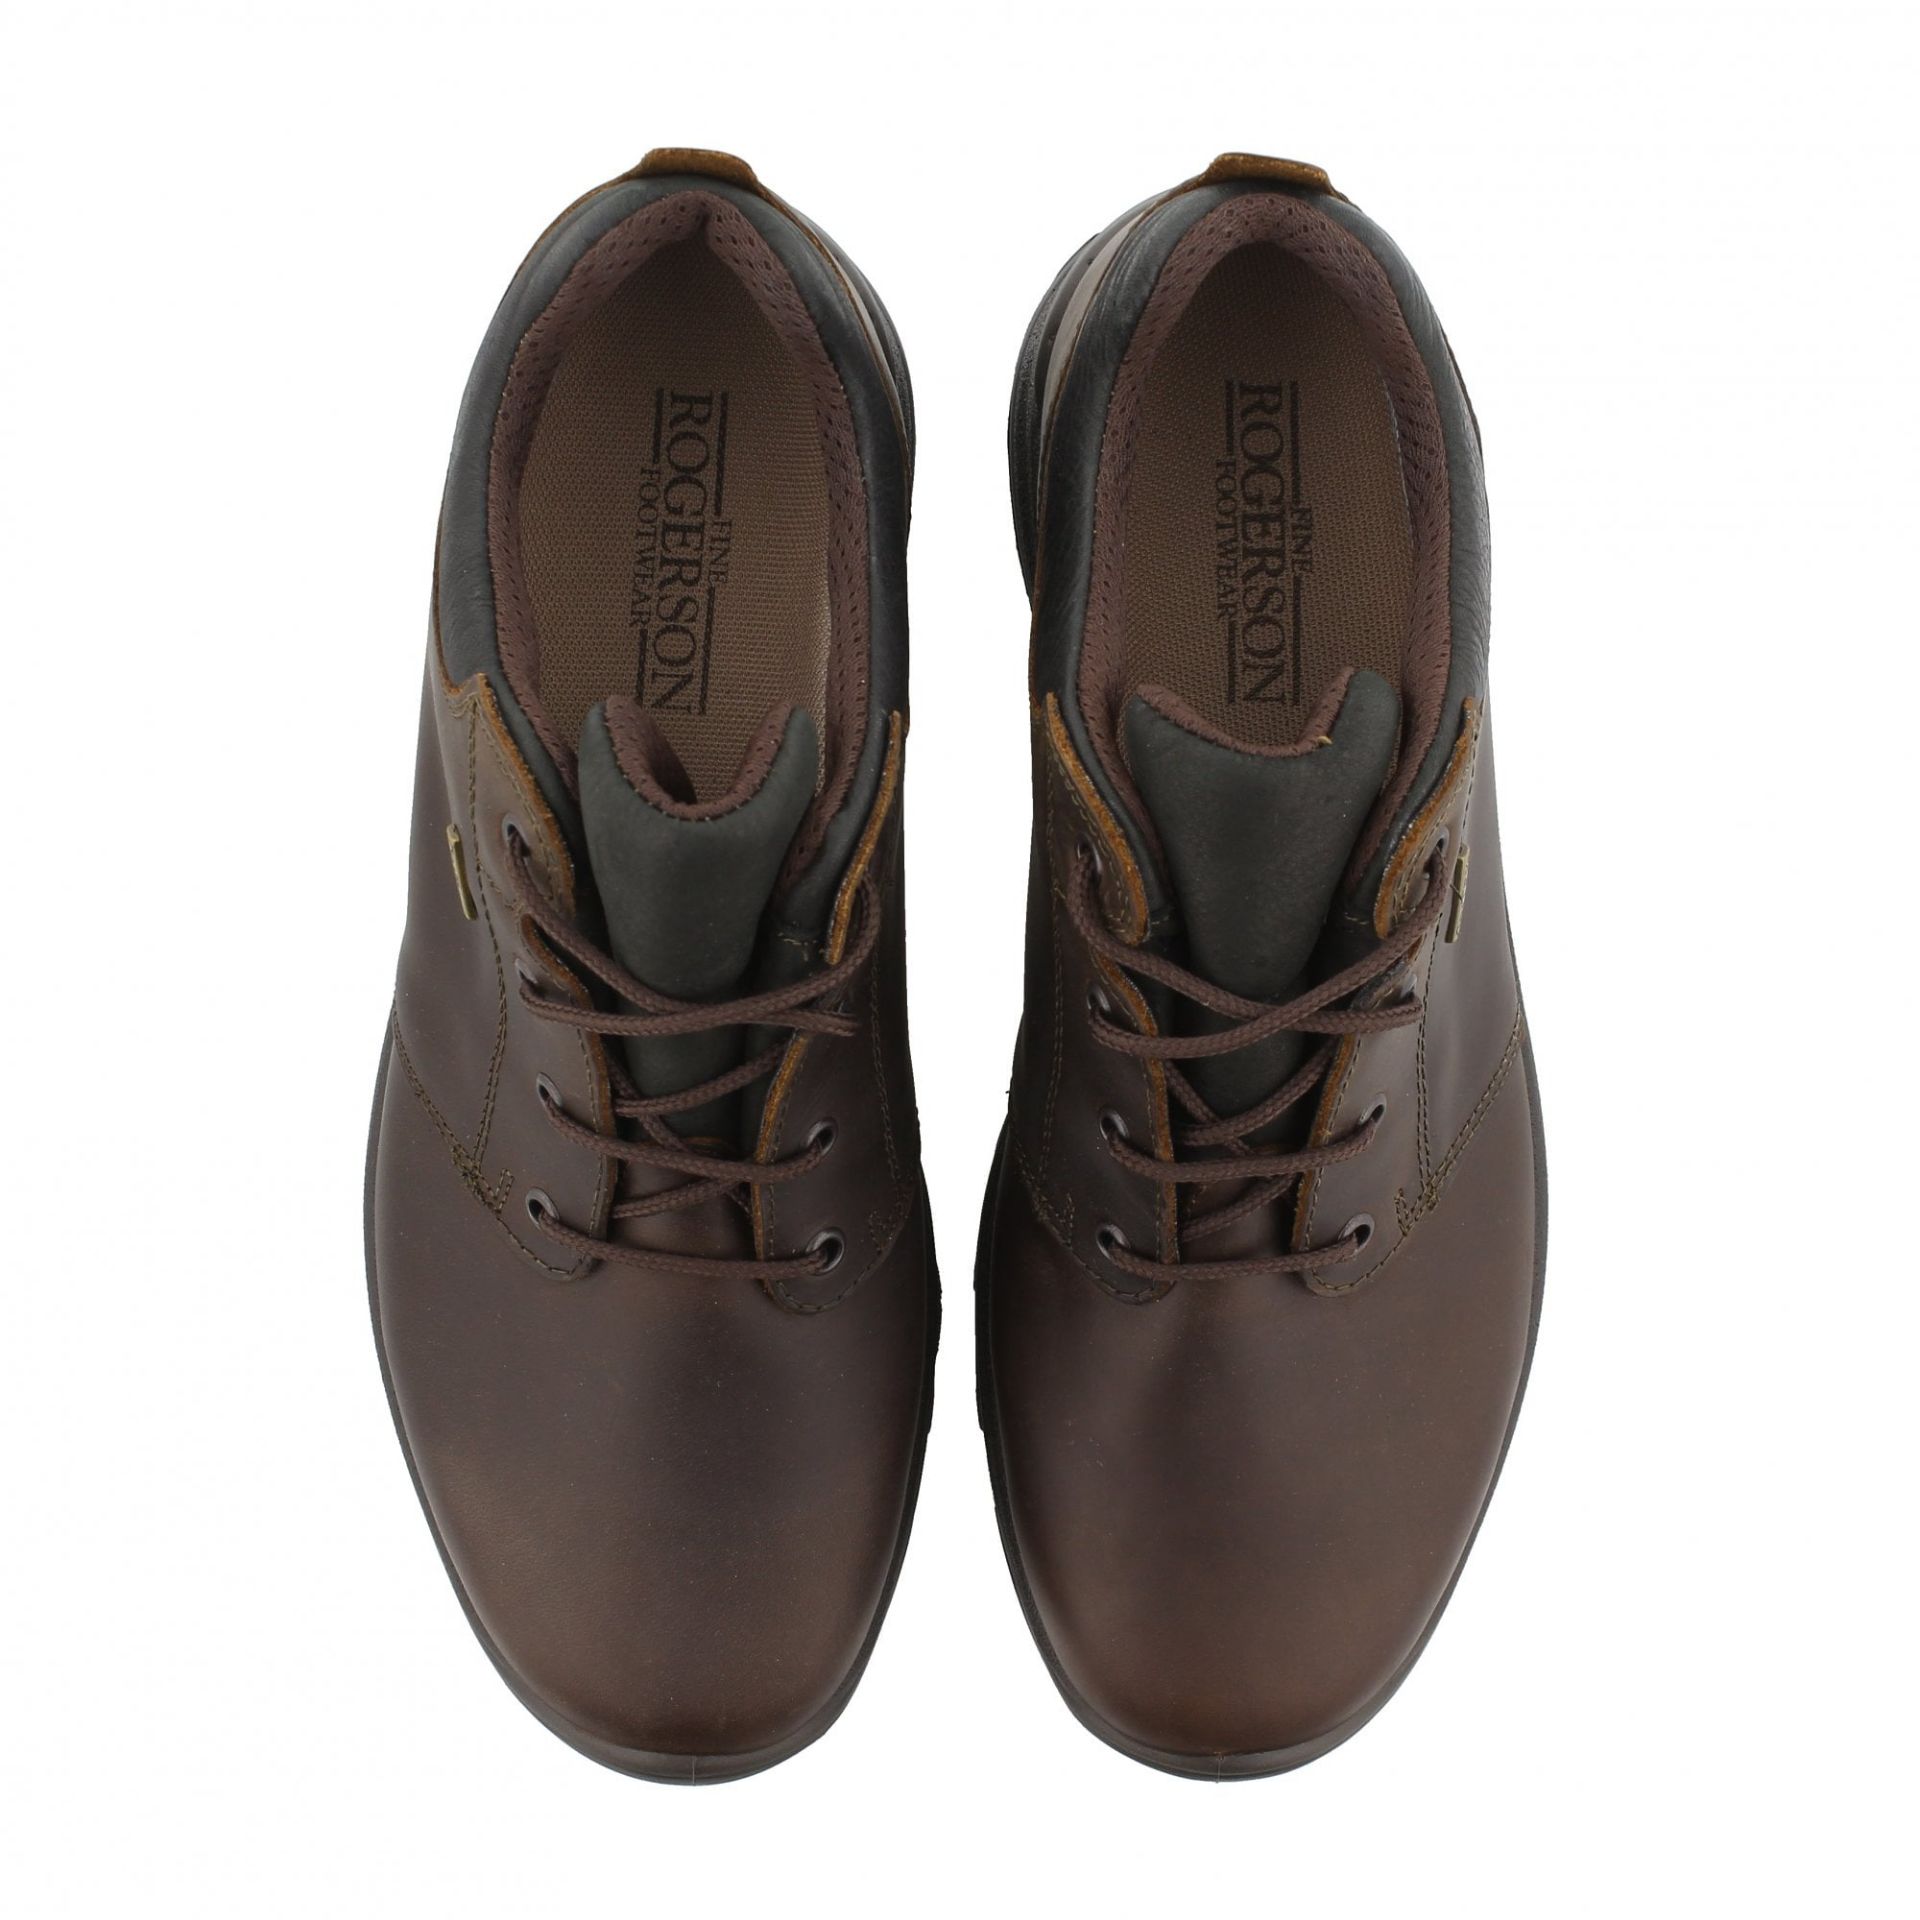 1 x Pair of Men's Grisport Brown Leather GriTex Shoes - Rogerson Footwear - Brand New and Boxed - - Image 7 of 9